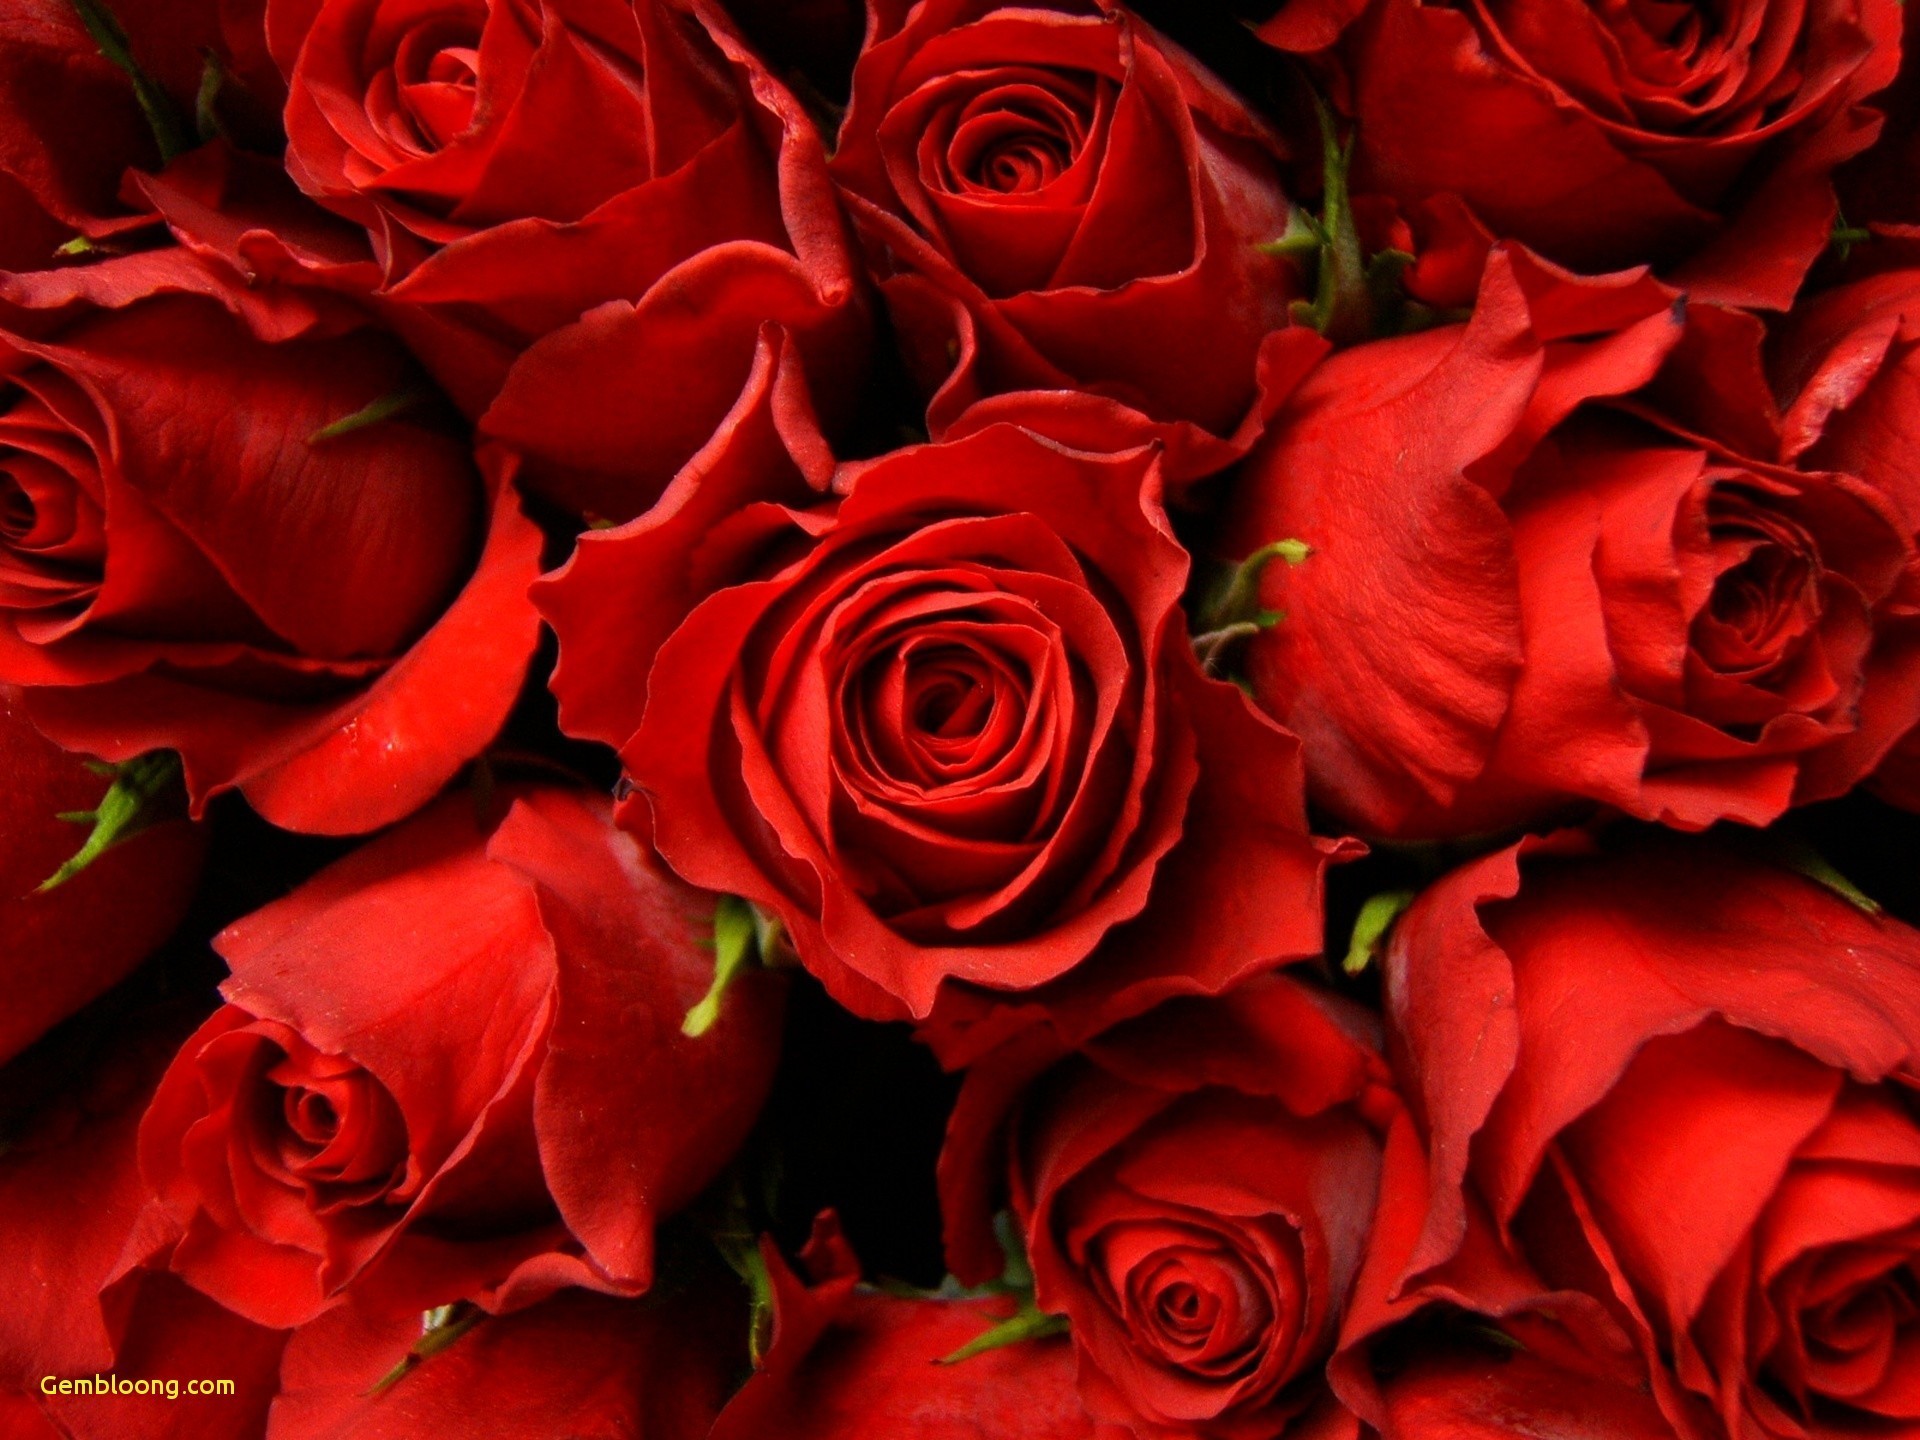 1920x1440 1920x1200 Pictures Of Flowers Roses And Wallpapers Download Wallpapers For  > 3d Red Rose Wallpaper Desktop .